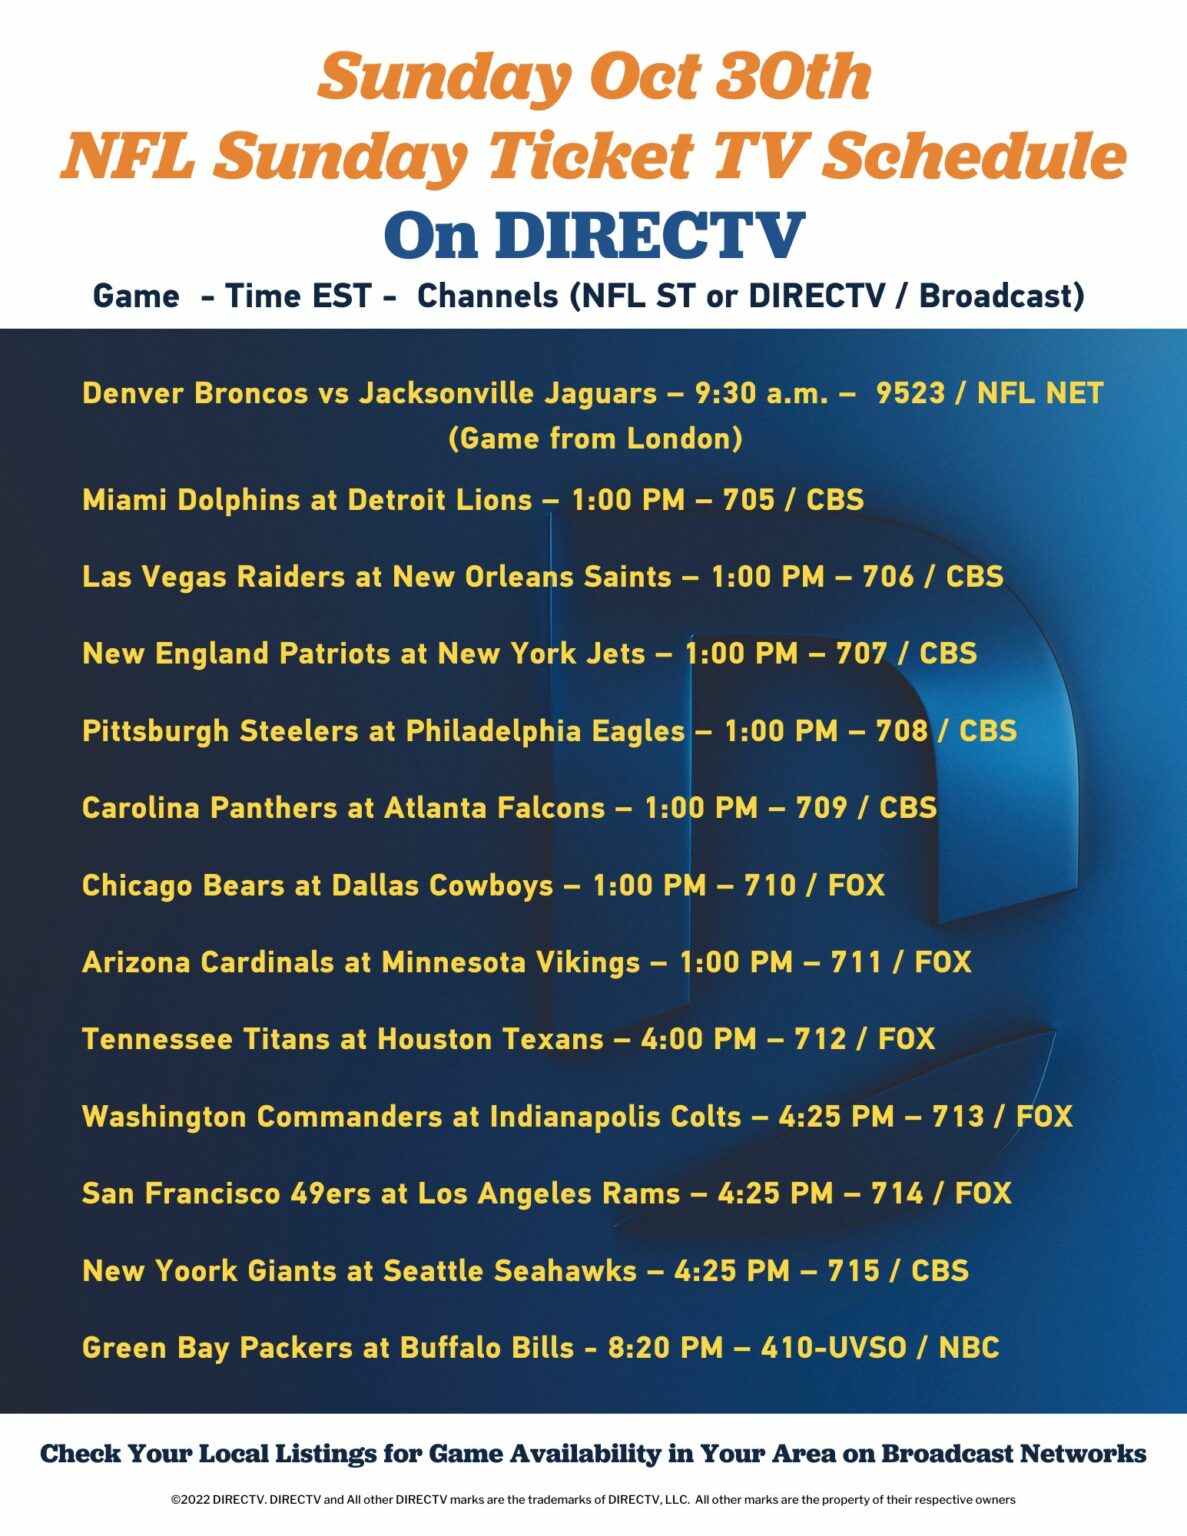 Wondering What Time and DIRECTV Channel the NFL Football Games are on